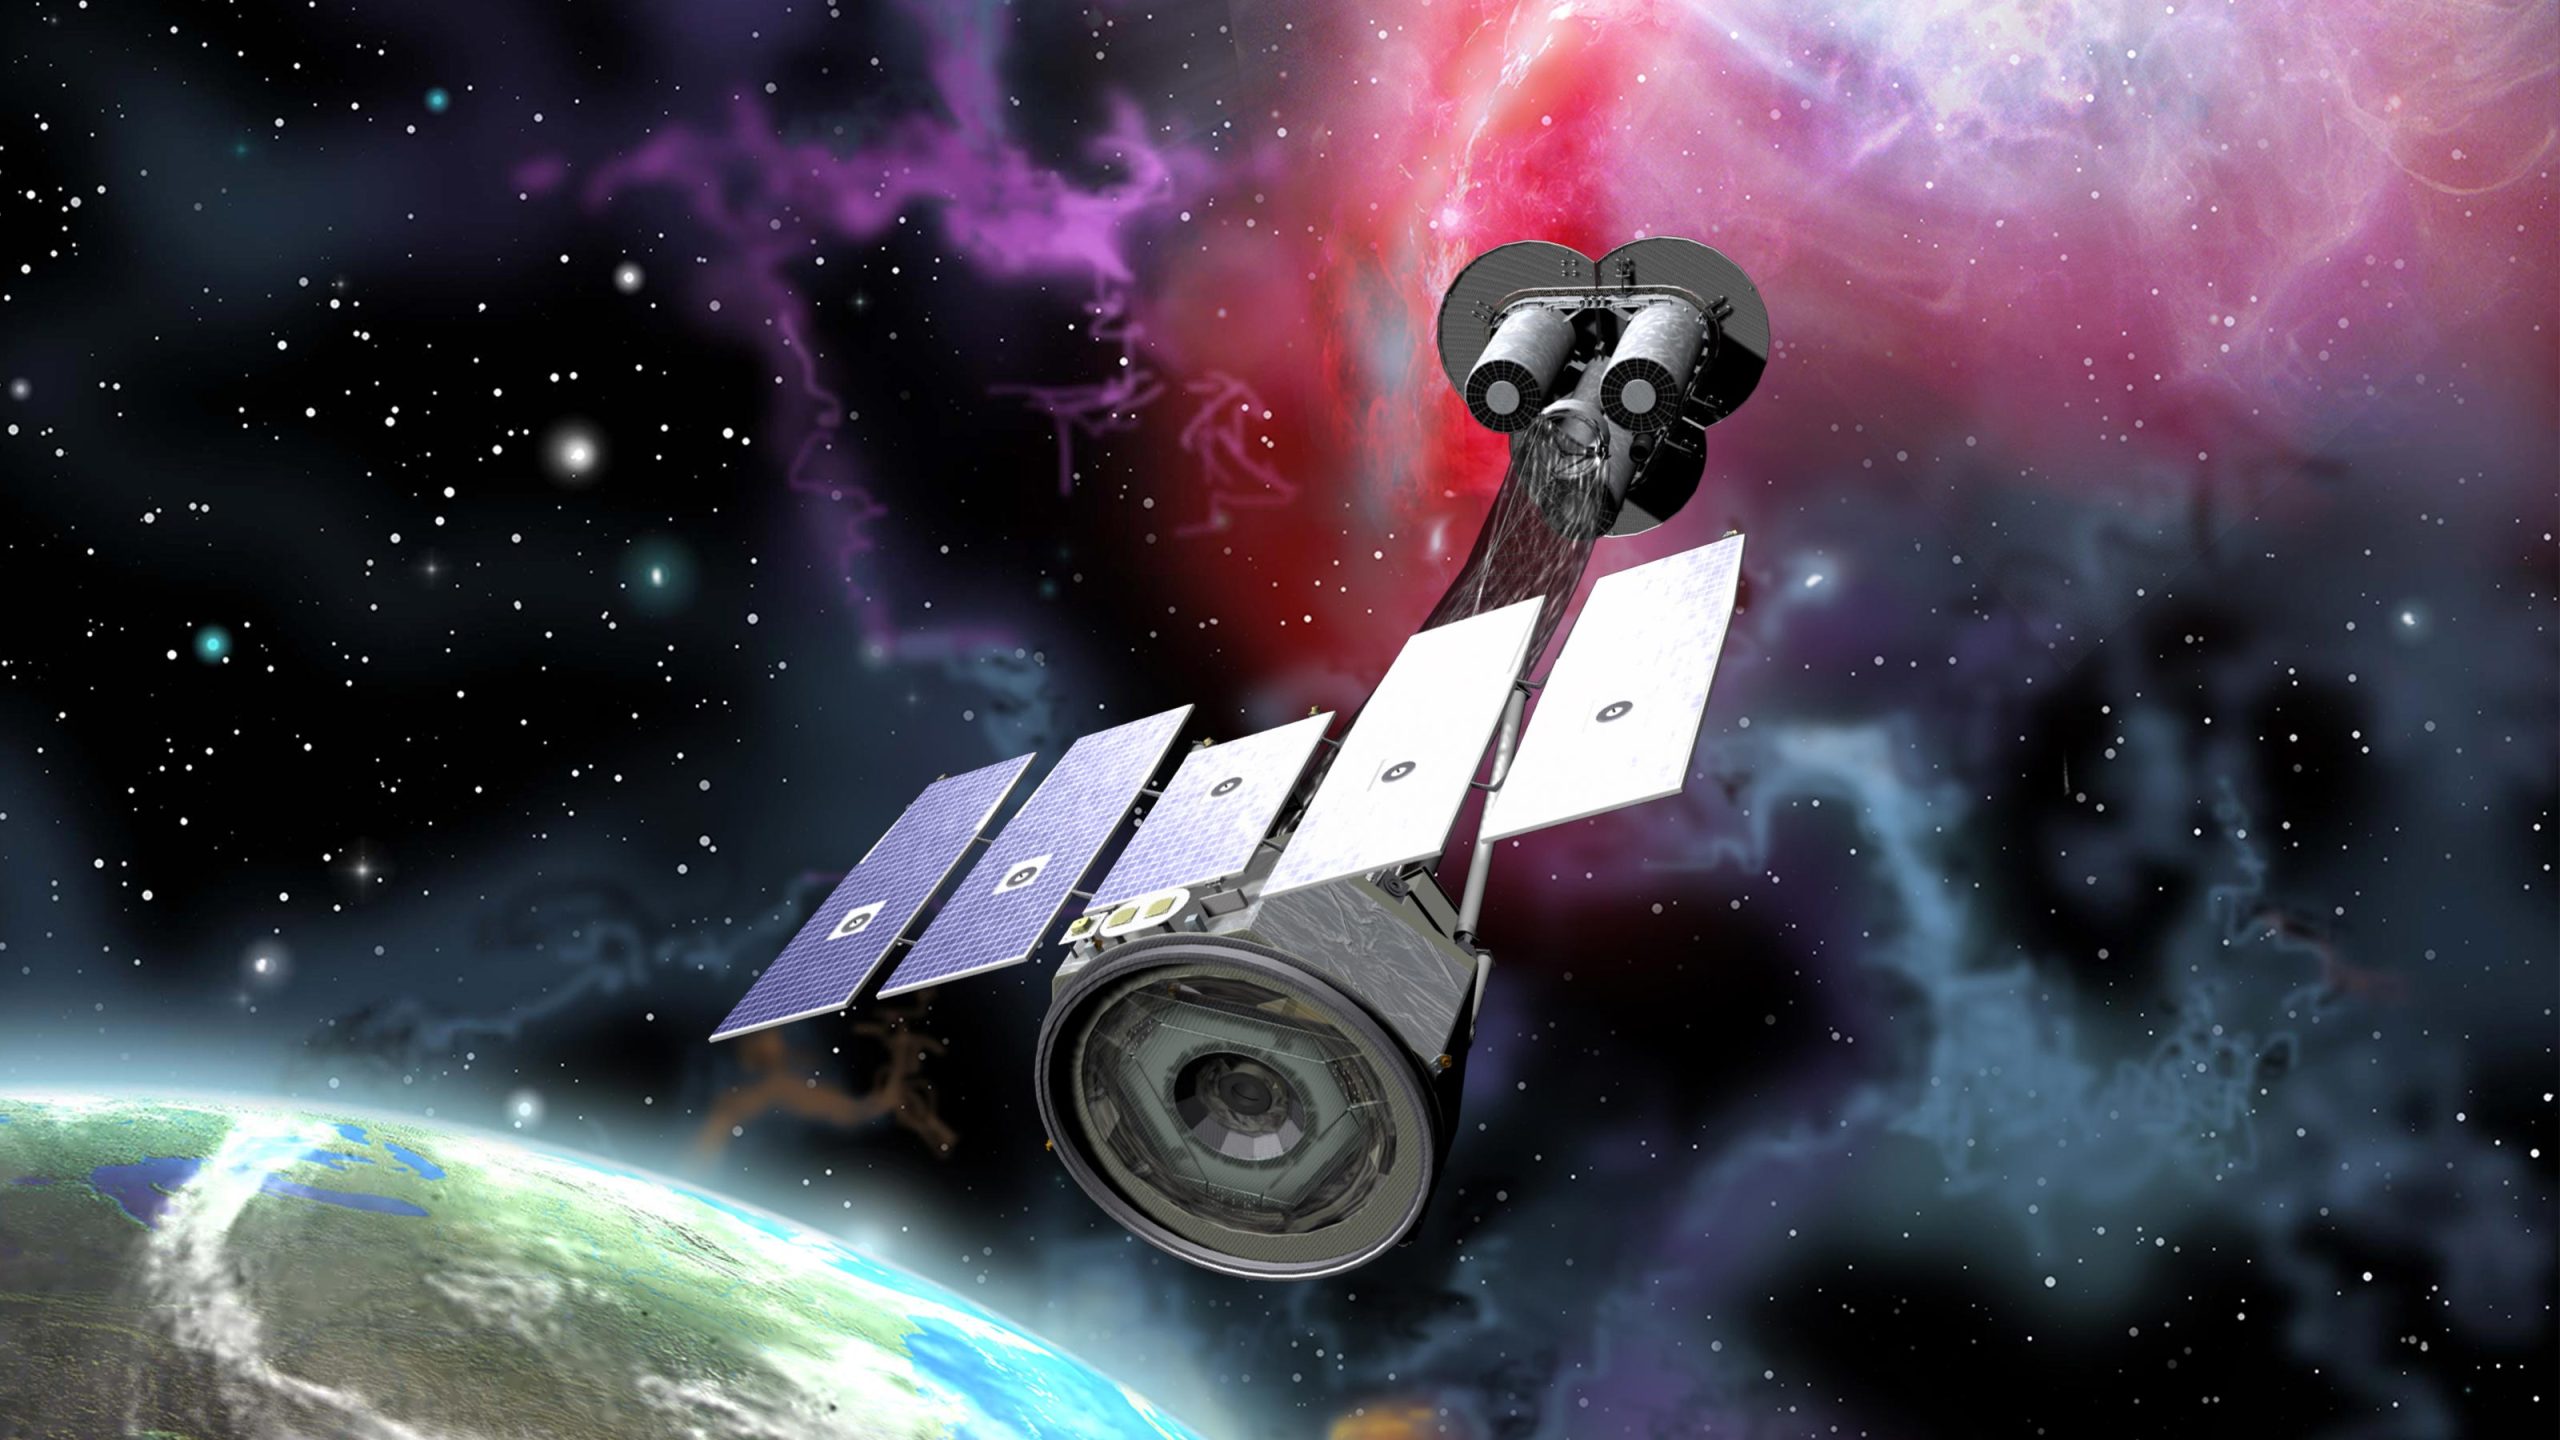 NASA's New IXPE Mission Opens Its Eyes and Is Ready for Discovery! - SciTechDaily